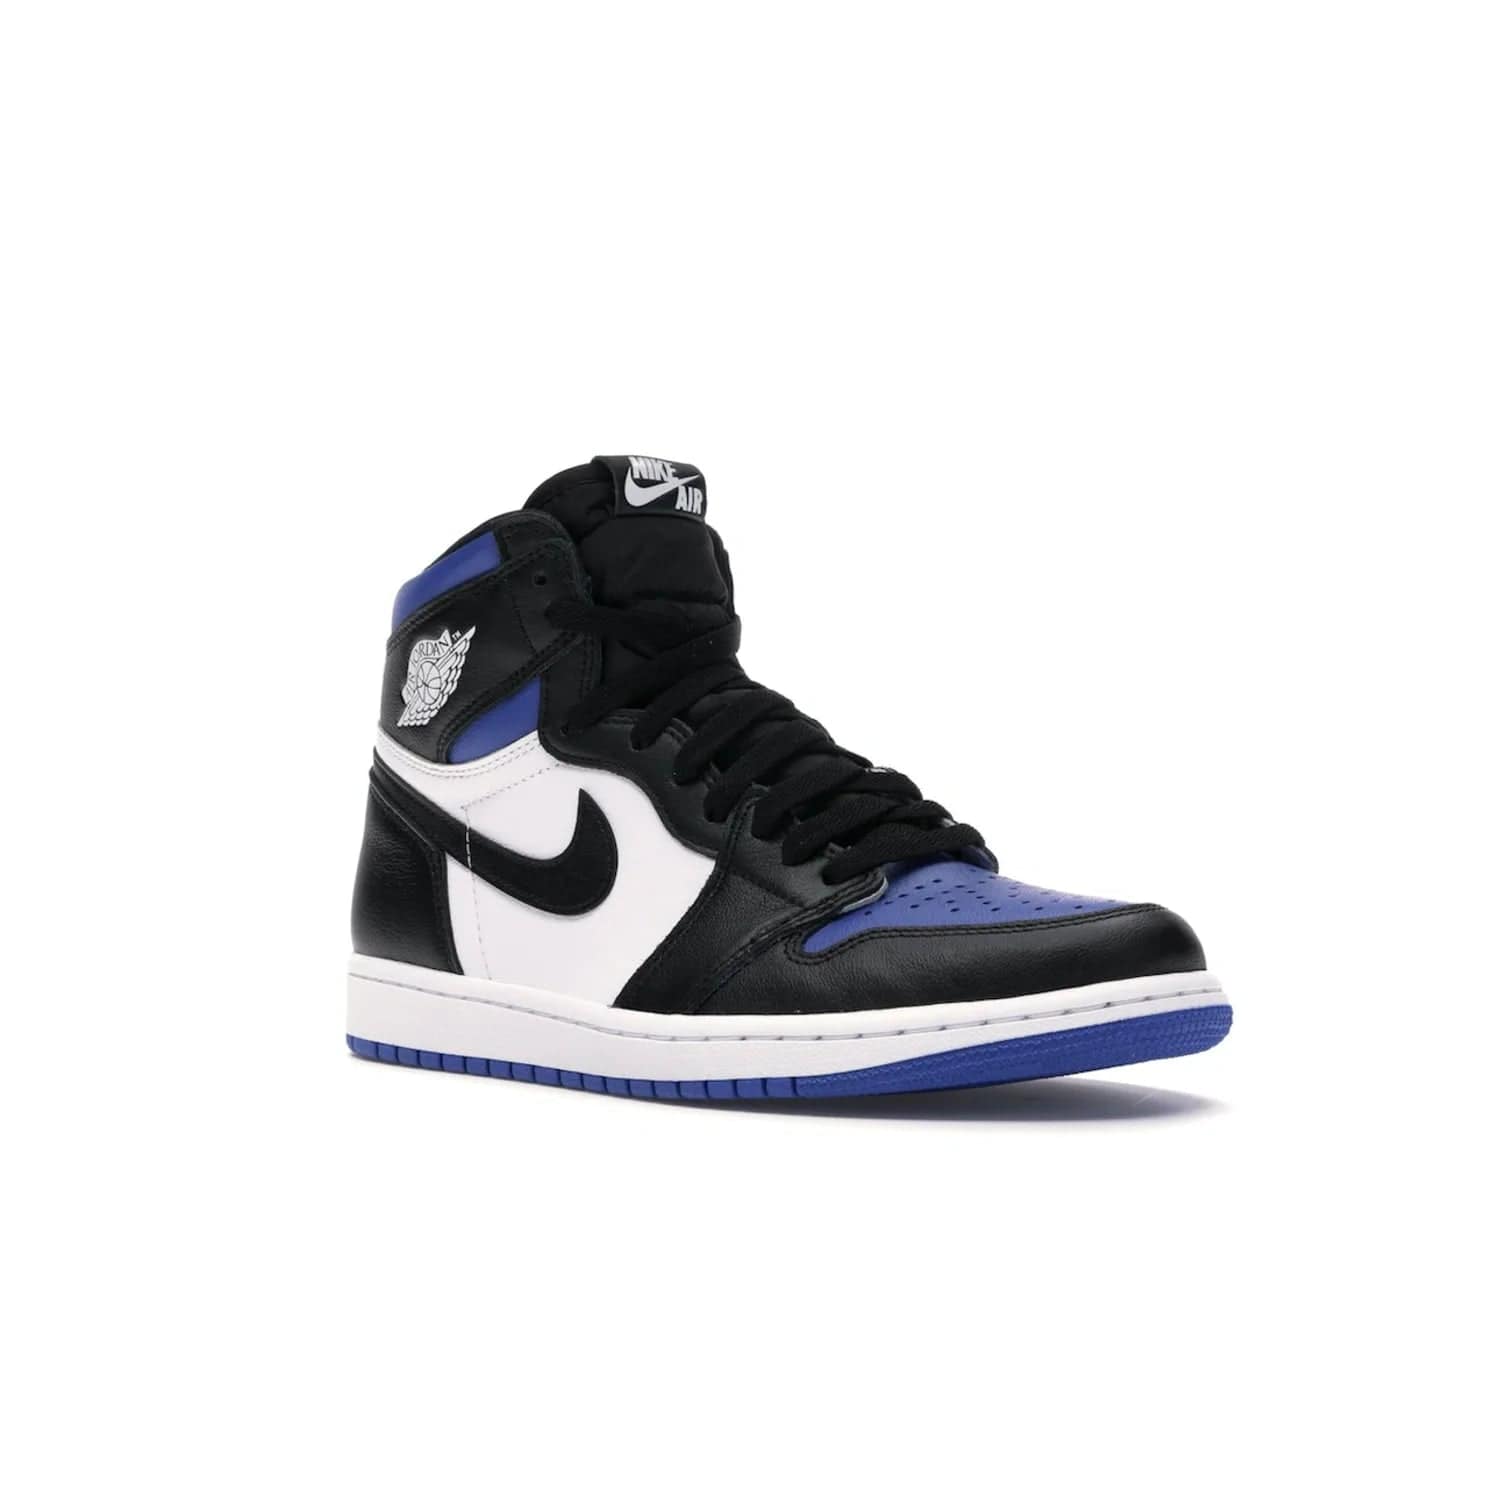 Jordan 1 Retro High Royal Toe - Image 5 - Only at www.BallersClubKickz.com - Refresh your look with the Jordan 1 Retro High Royal Toe. This classic AJ 1 sports a white and royal leather upper, black leather overlays, and branded leather tongue tag. Pick up today and set the streets ablaze.